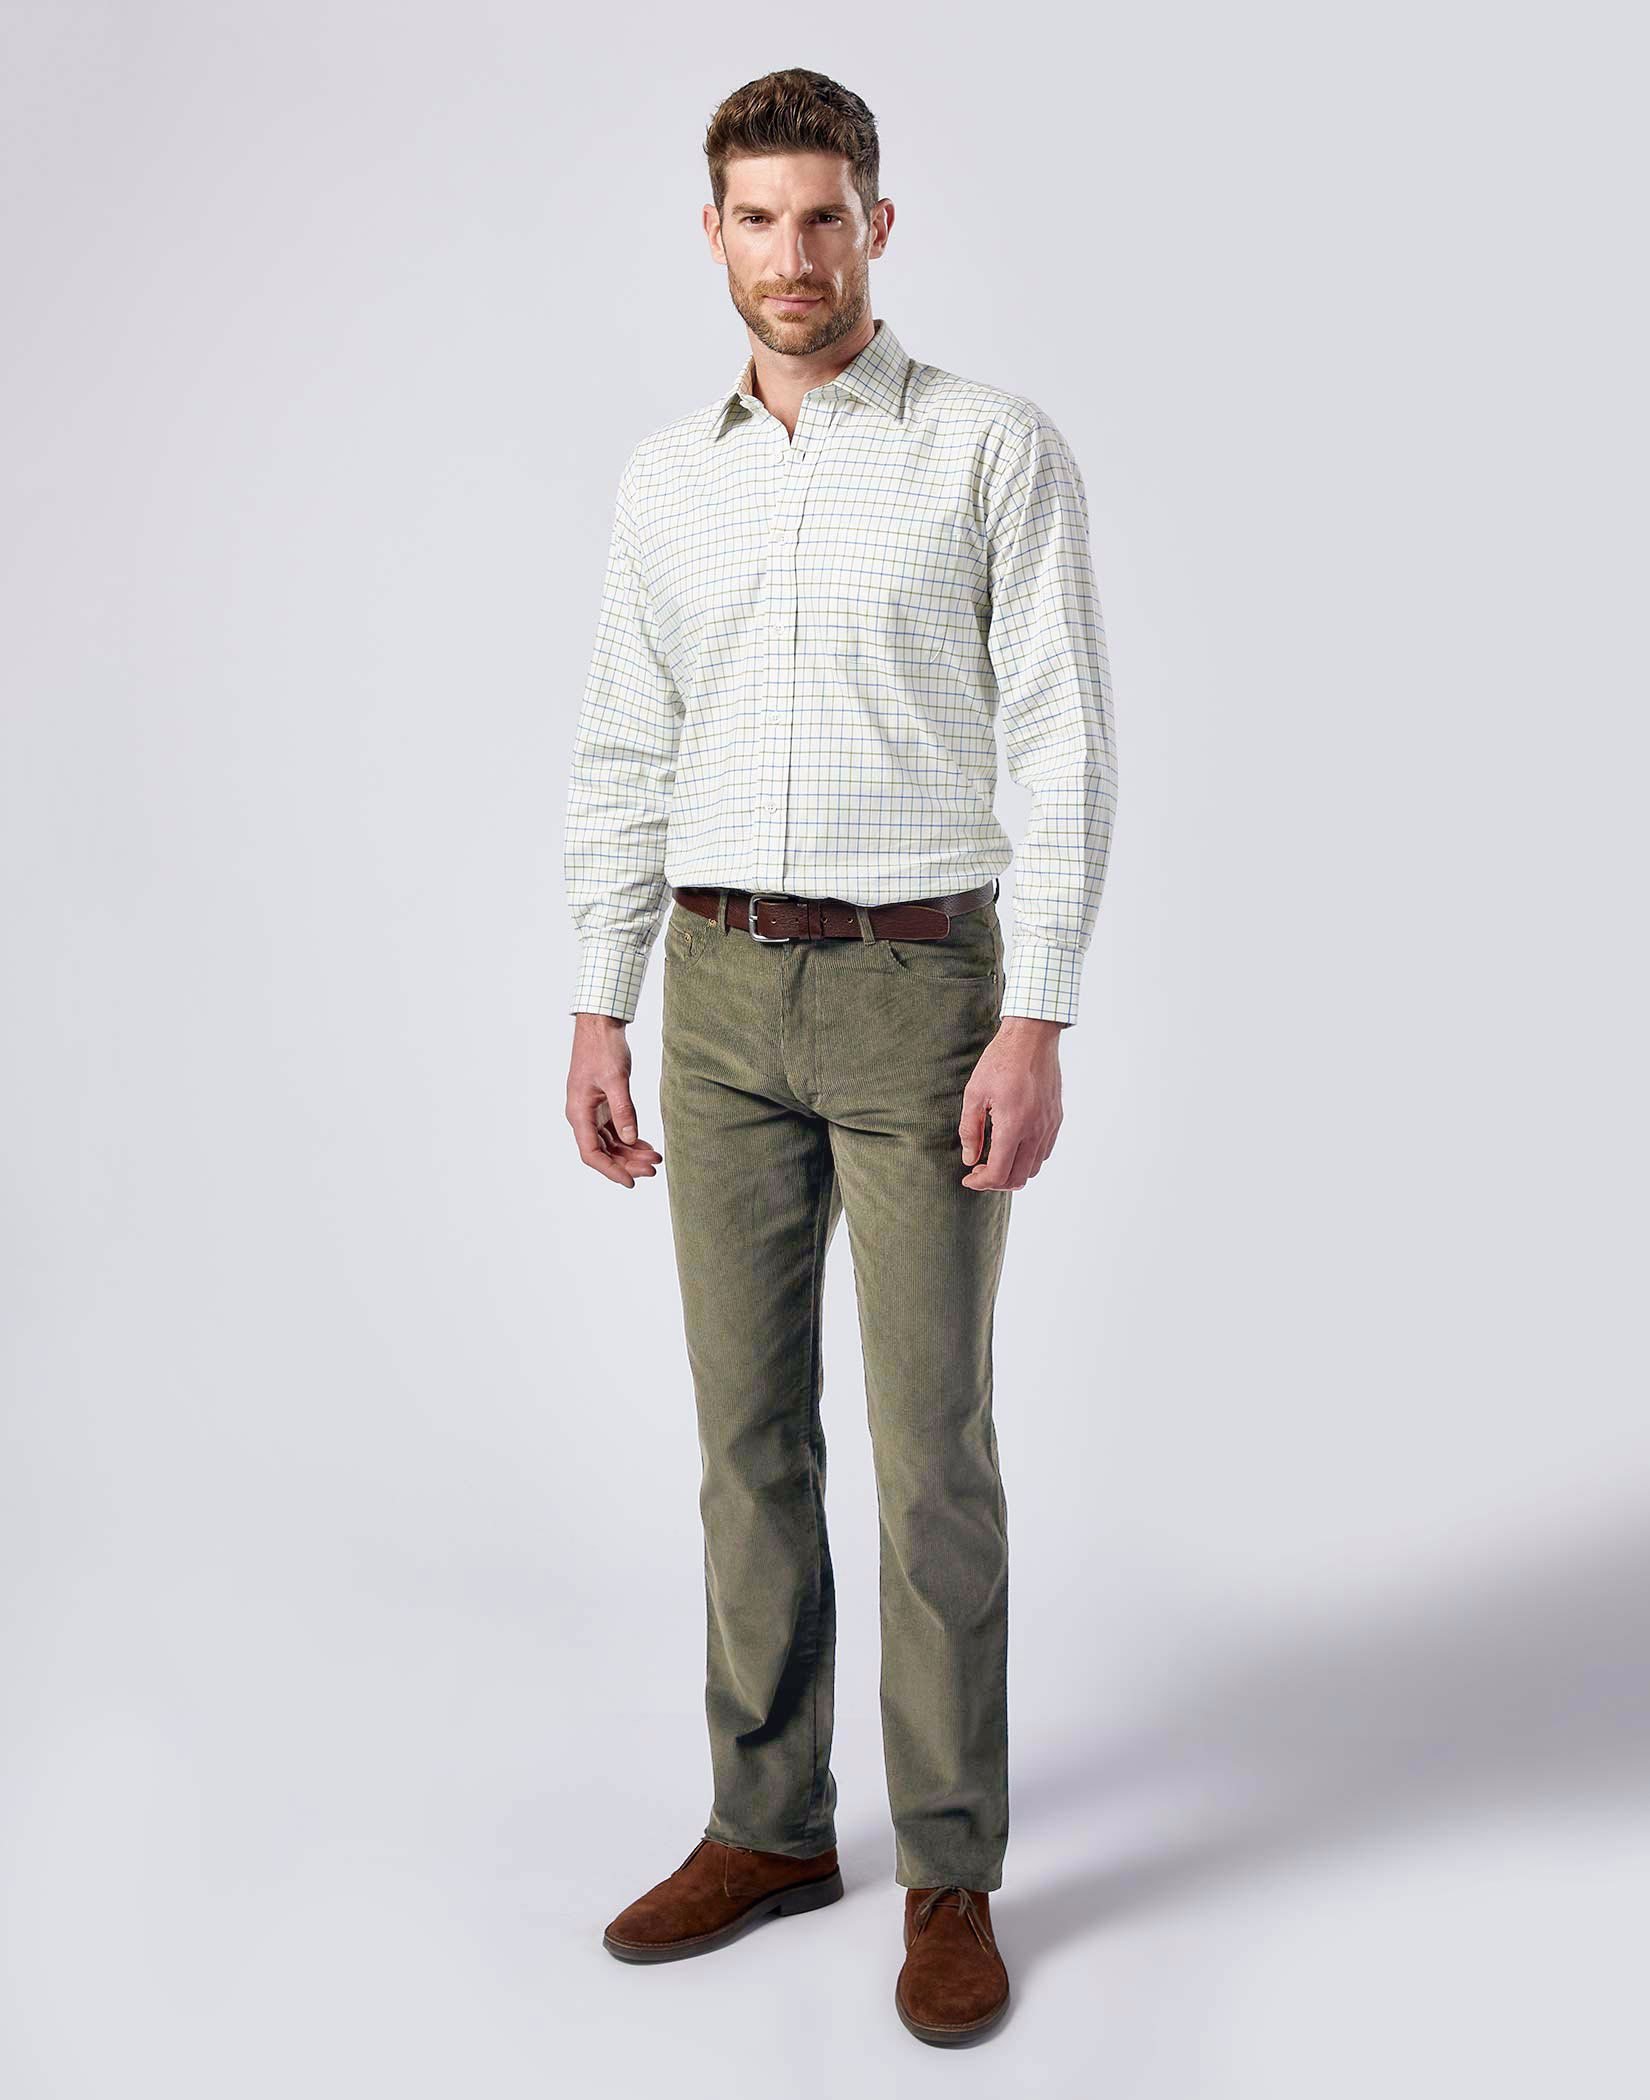 Clearance - Men's clothing from Joseph Turner